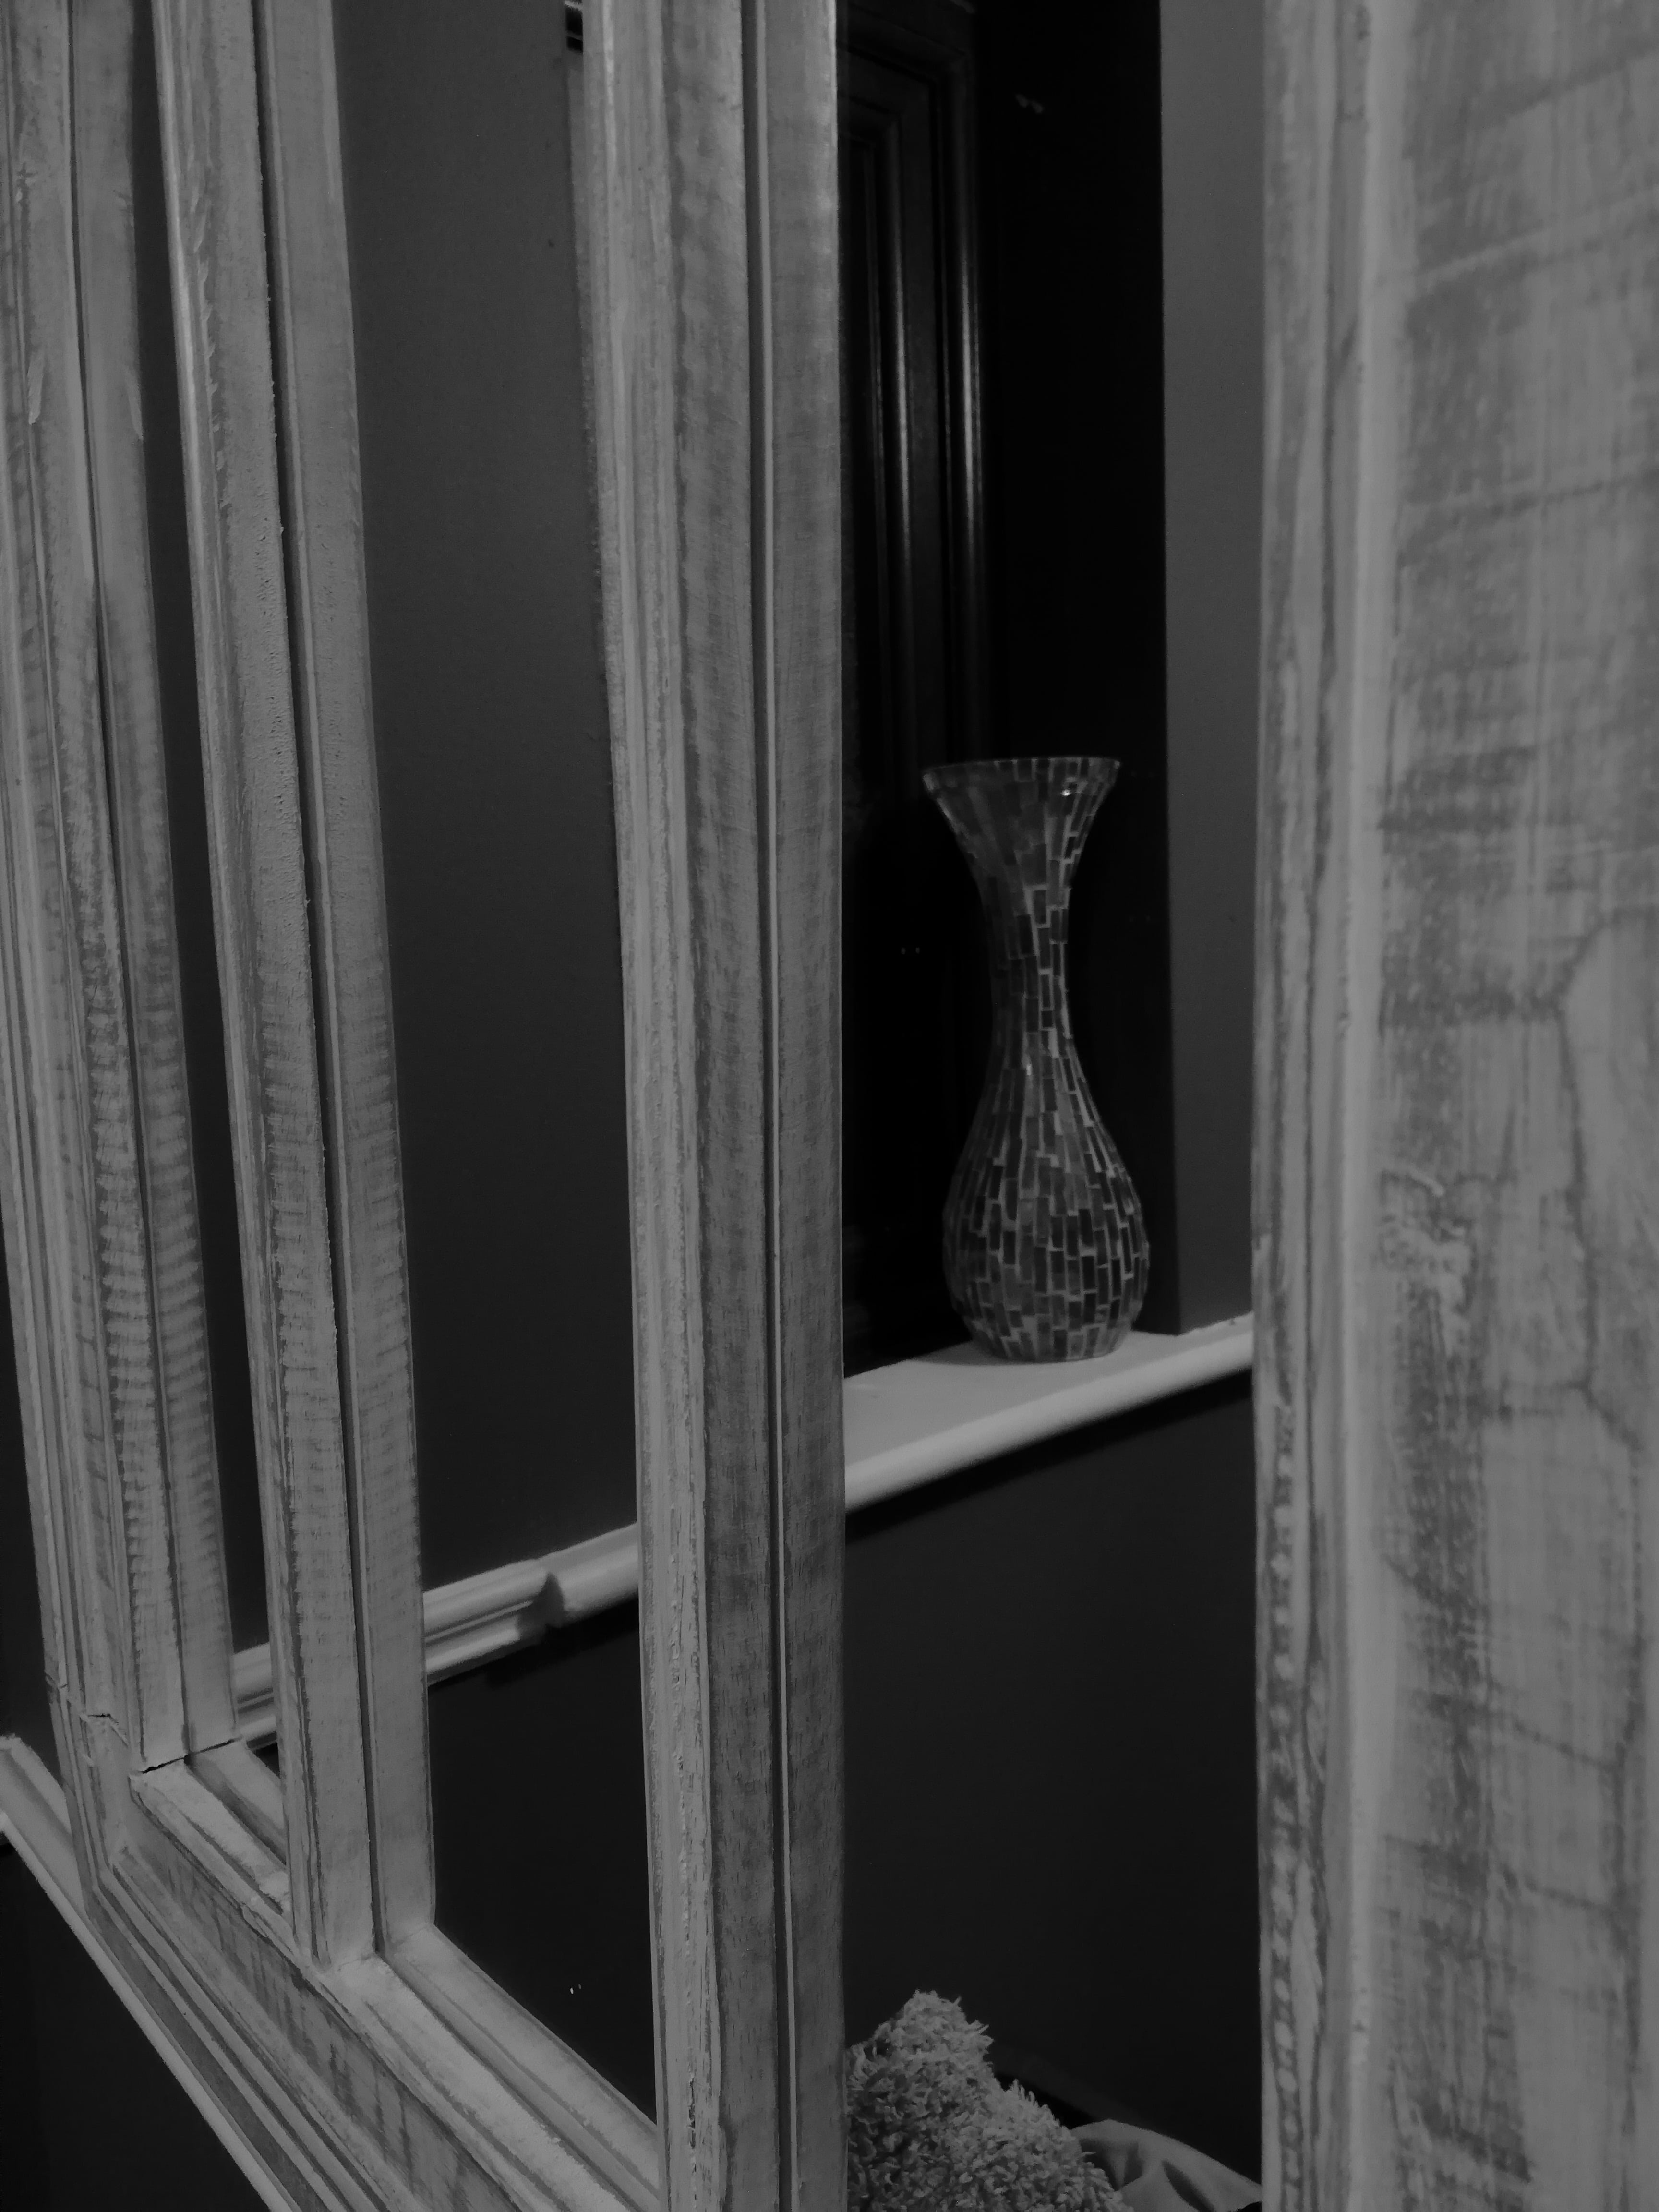 This is a black and white shot of a multicolored vase reflecting off of a wall mirror